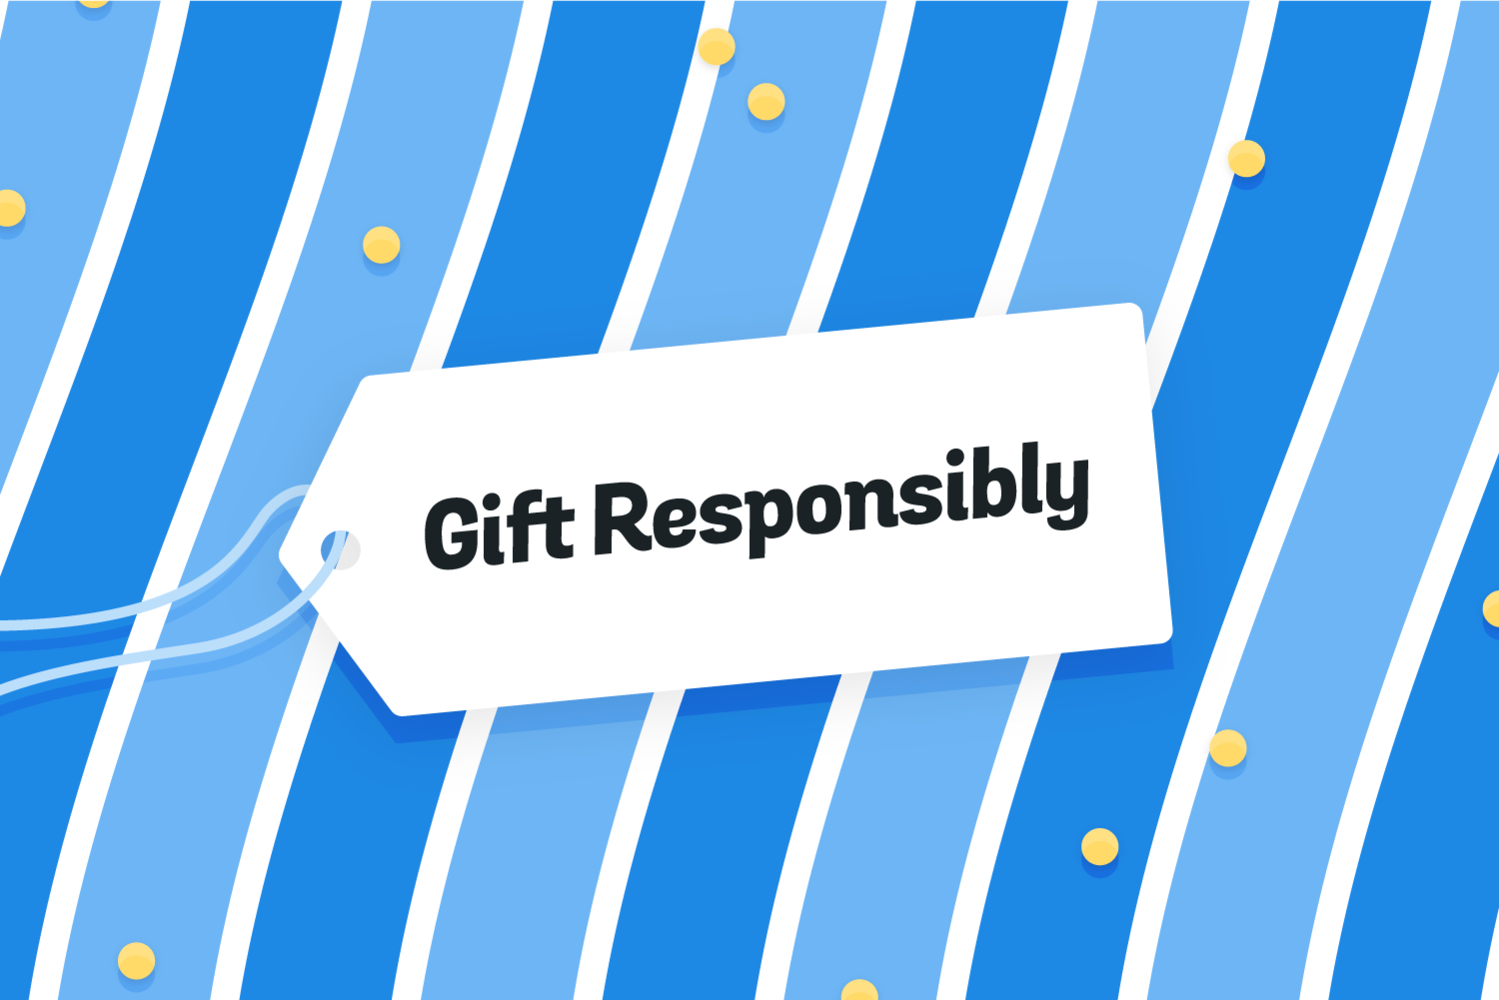 NCPG Gift Responsibly Campaign 2021